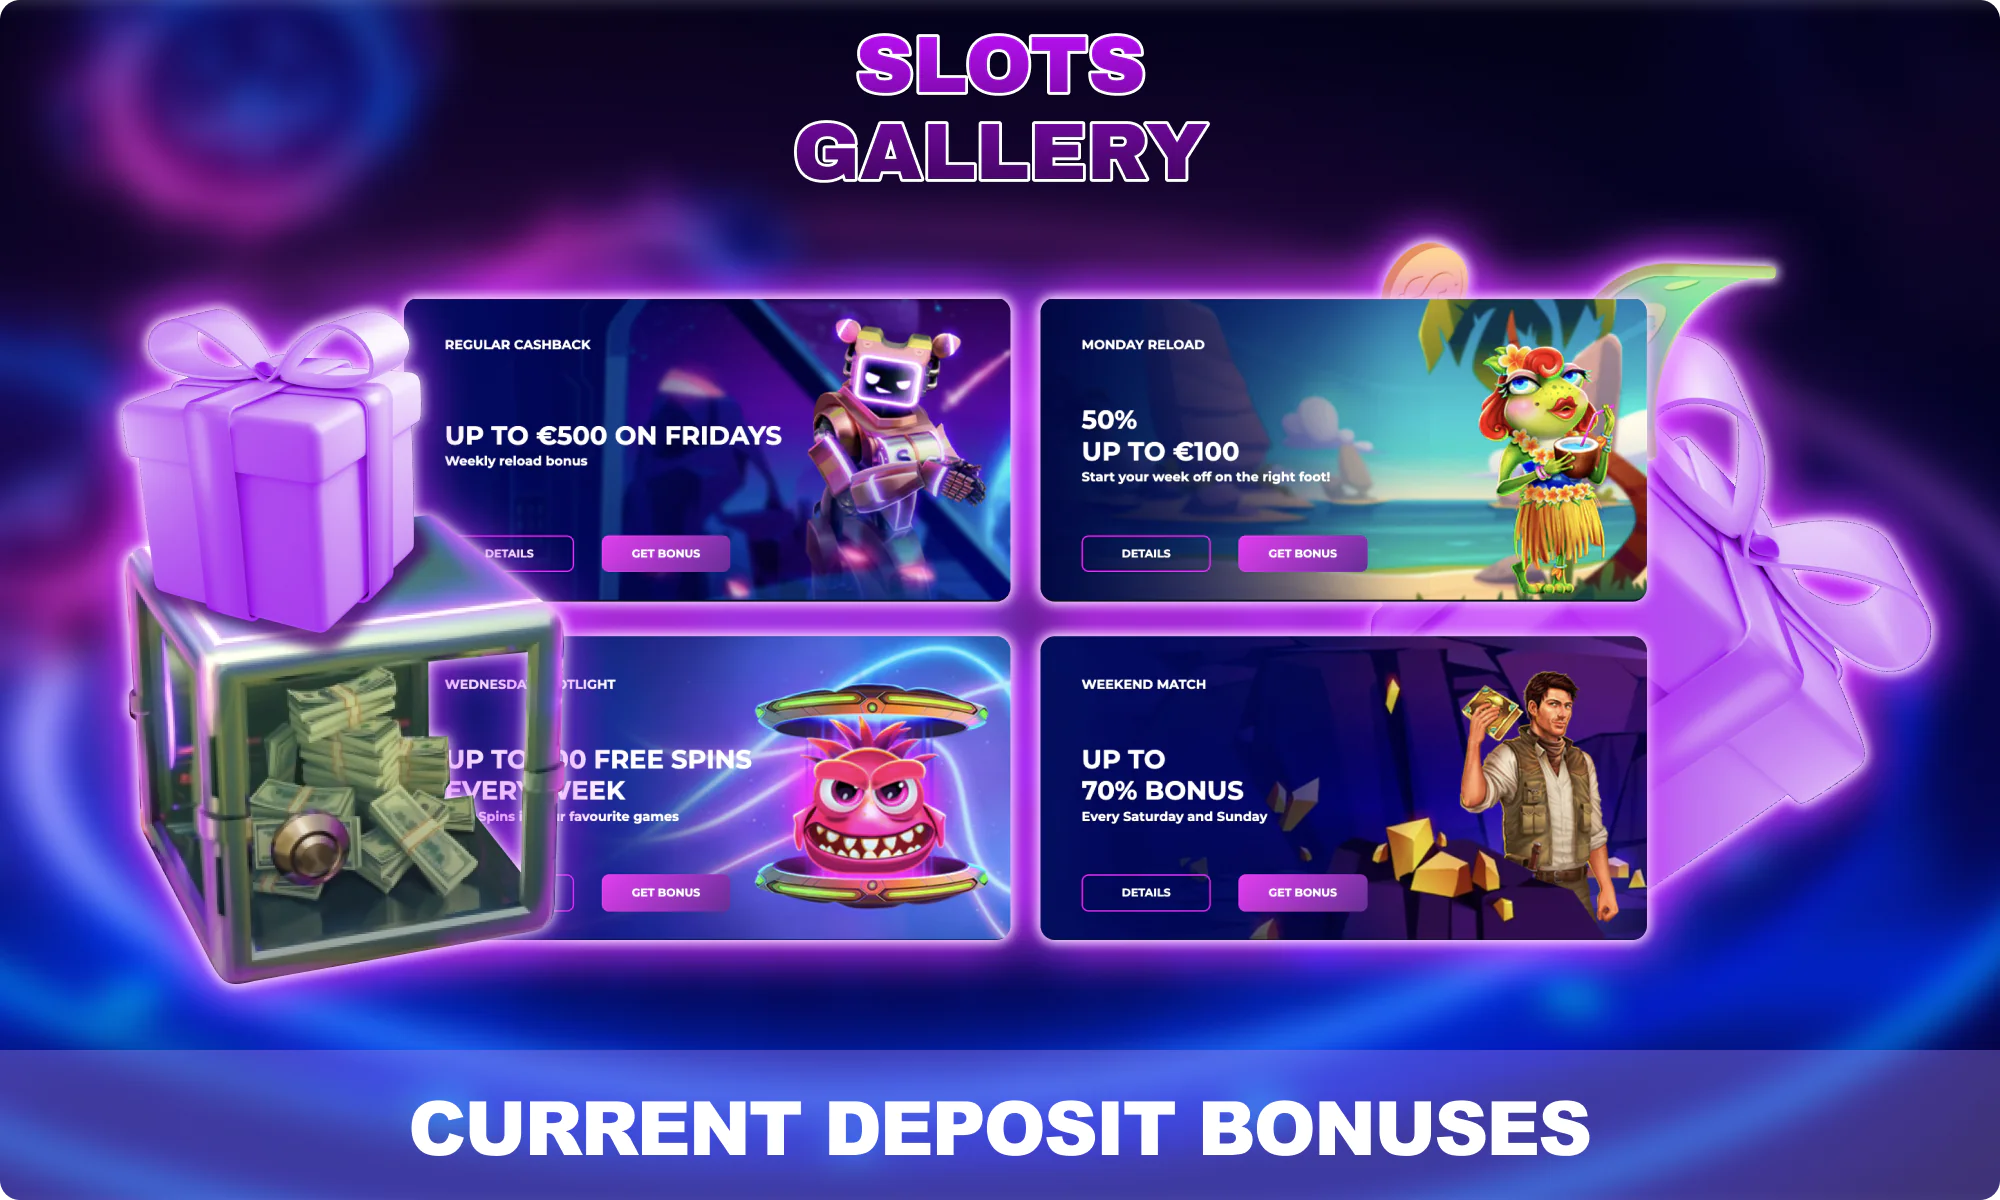 Slots Gallery bonuses for depositing on the site